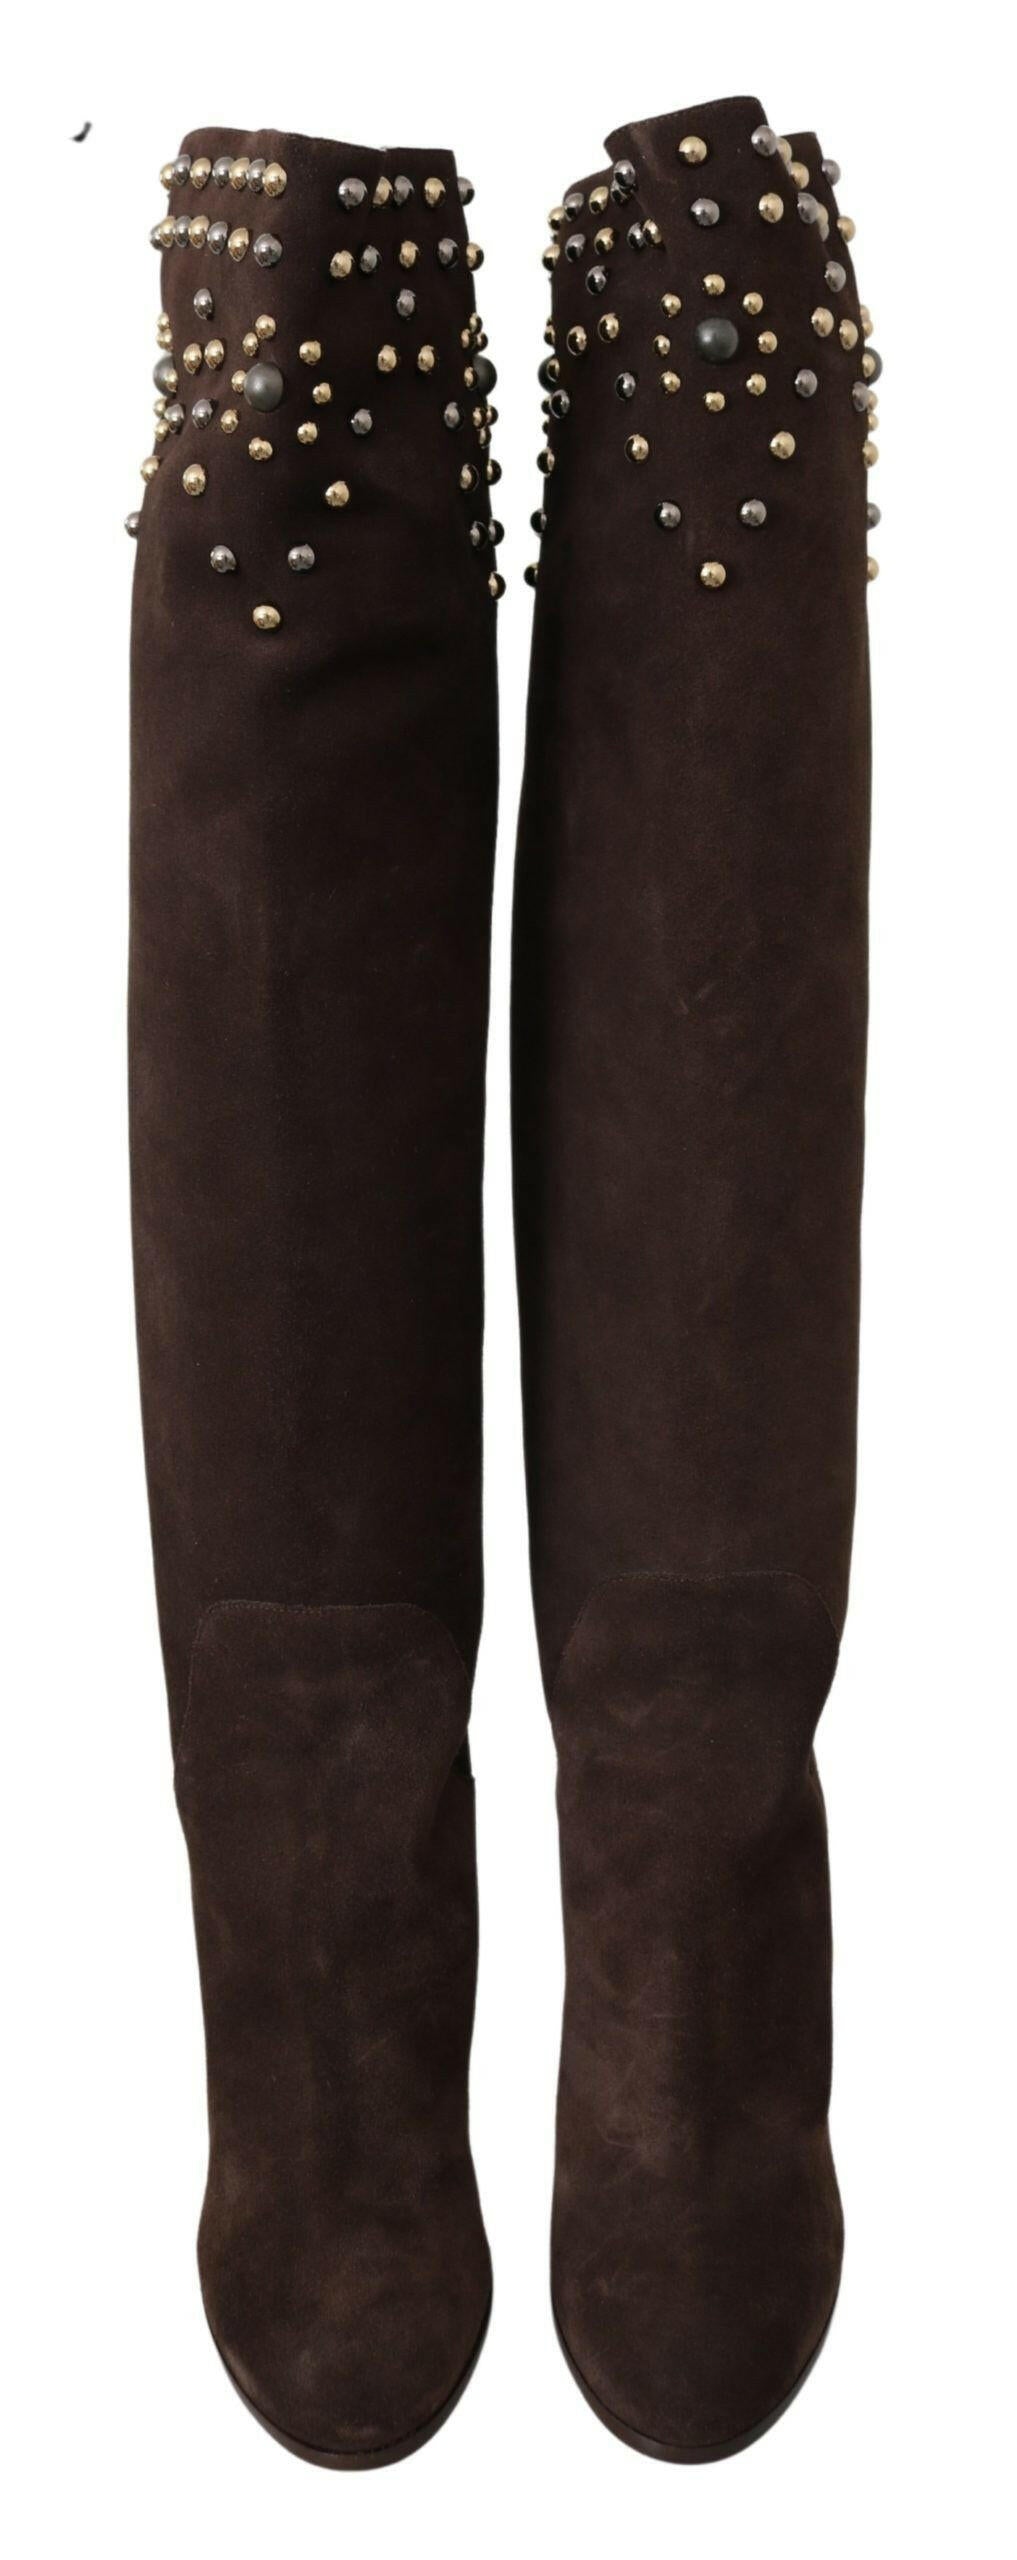 Dolce & Gabbana Brown Suede Studded Knee High Shoes Boots - GENUINE AUTHENTIC BRAND LLC  